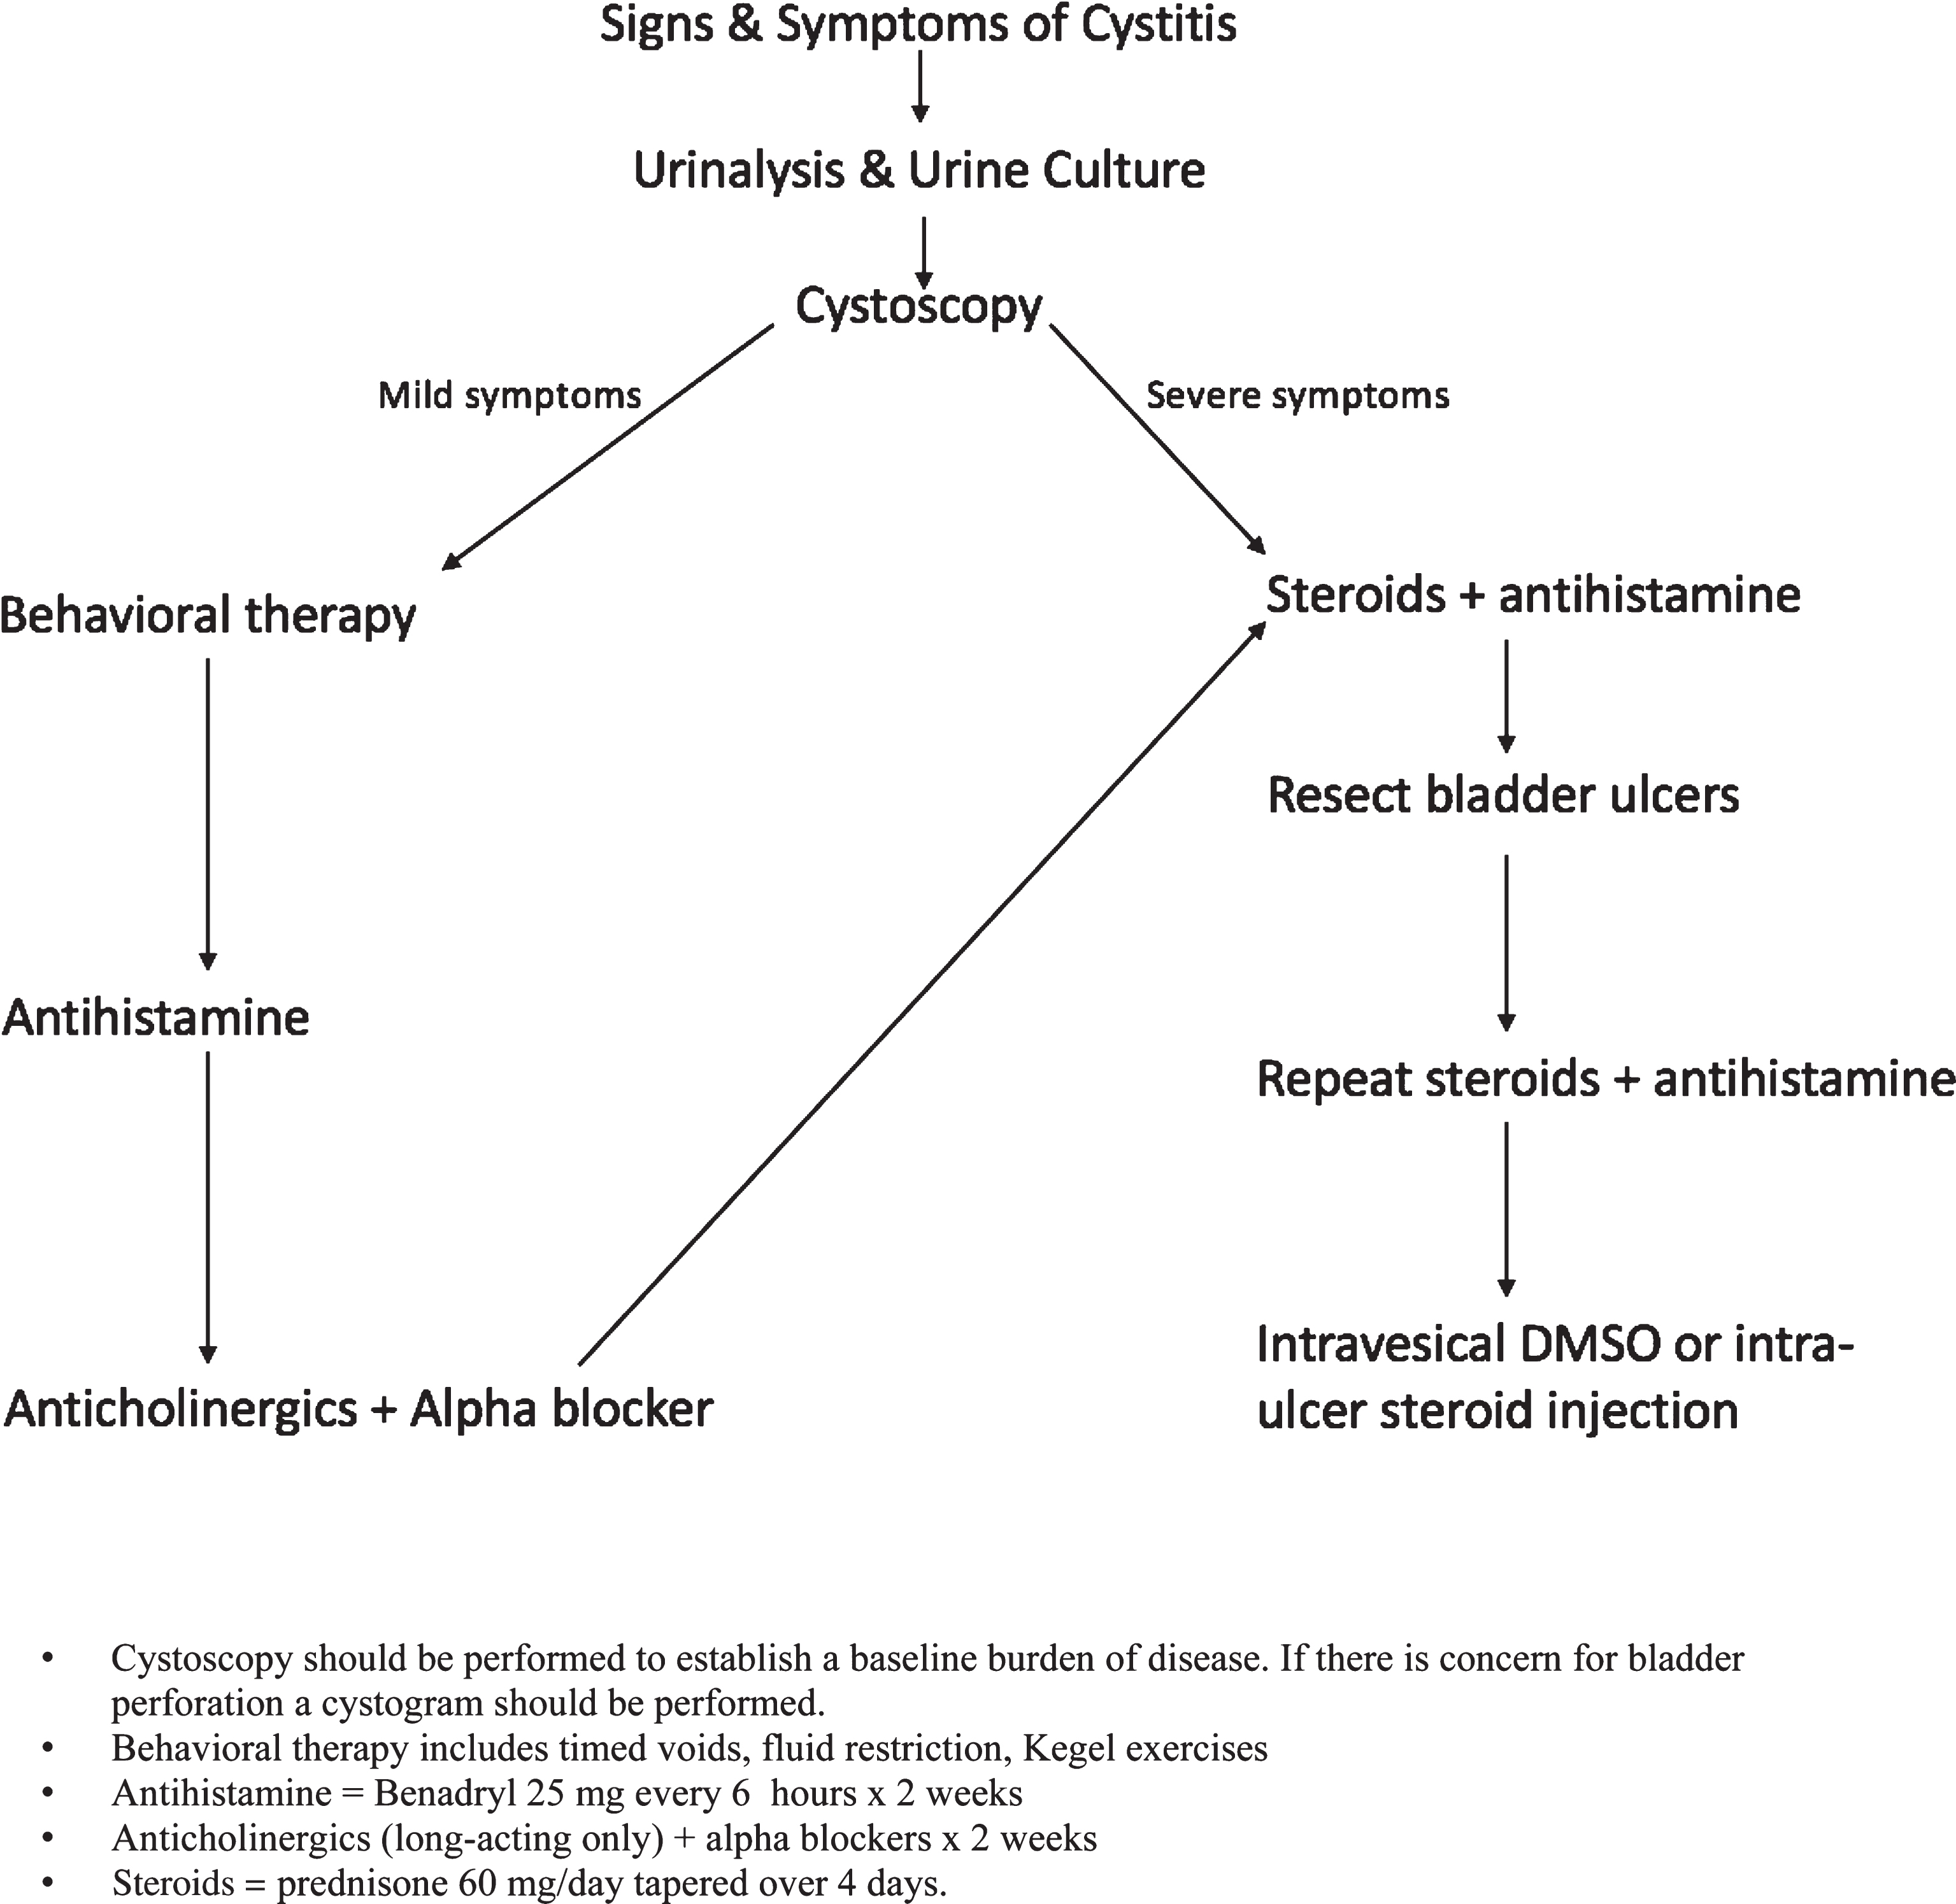 Mitomycin-C treatment algorithm demonstrating the escalation of therapy for management of symptoms. Depending on the severity of the patient’s symptoms steps in the algorithm may be skipped.